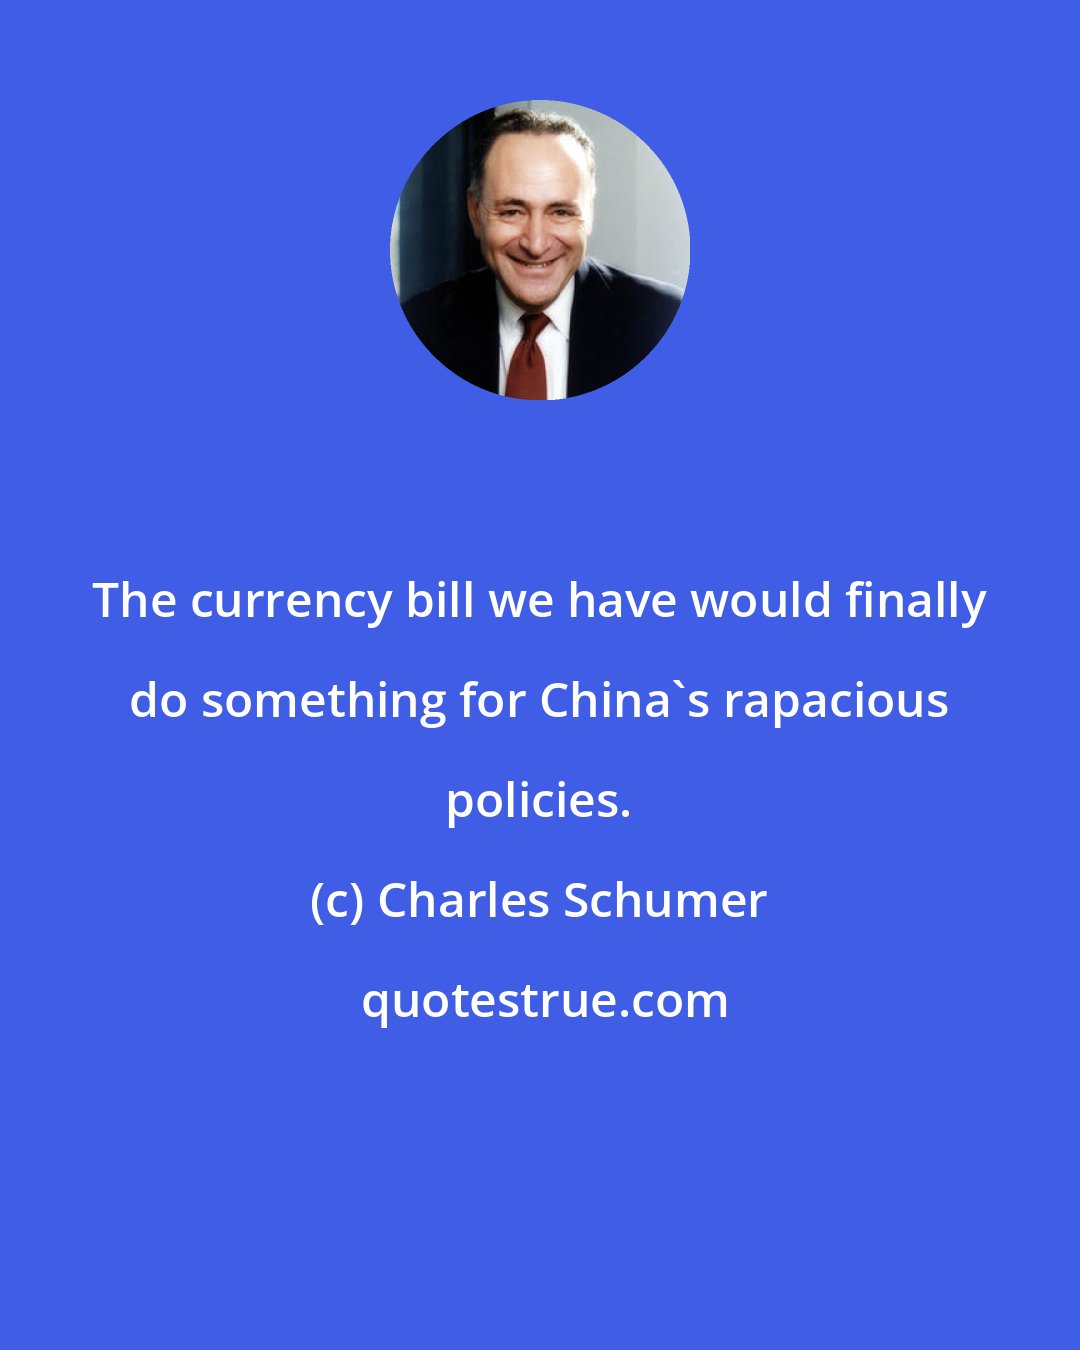 Charles Schumer: The currency bill we have would finally do something for China`s rapacious policies.